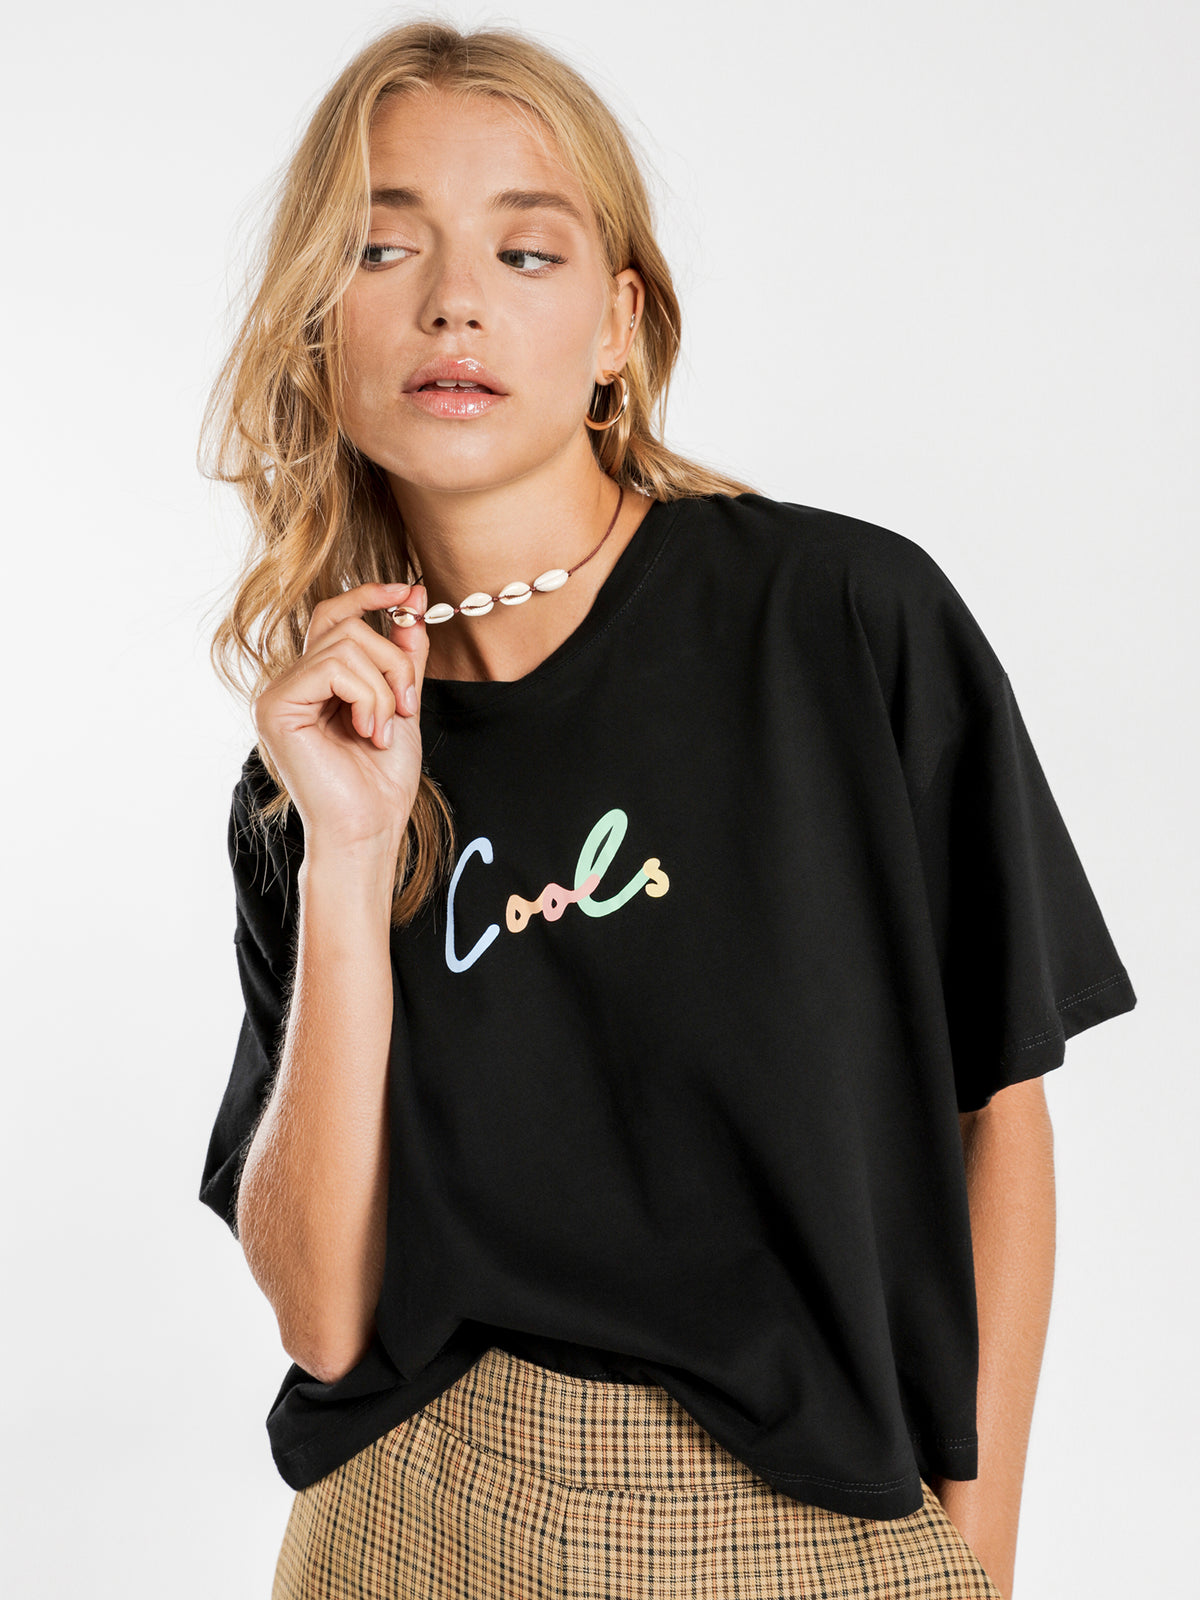 Colour Cools Boxy T-Shirt in Black